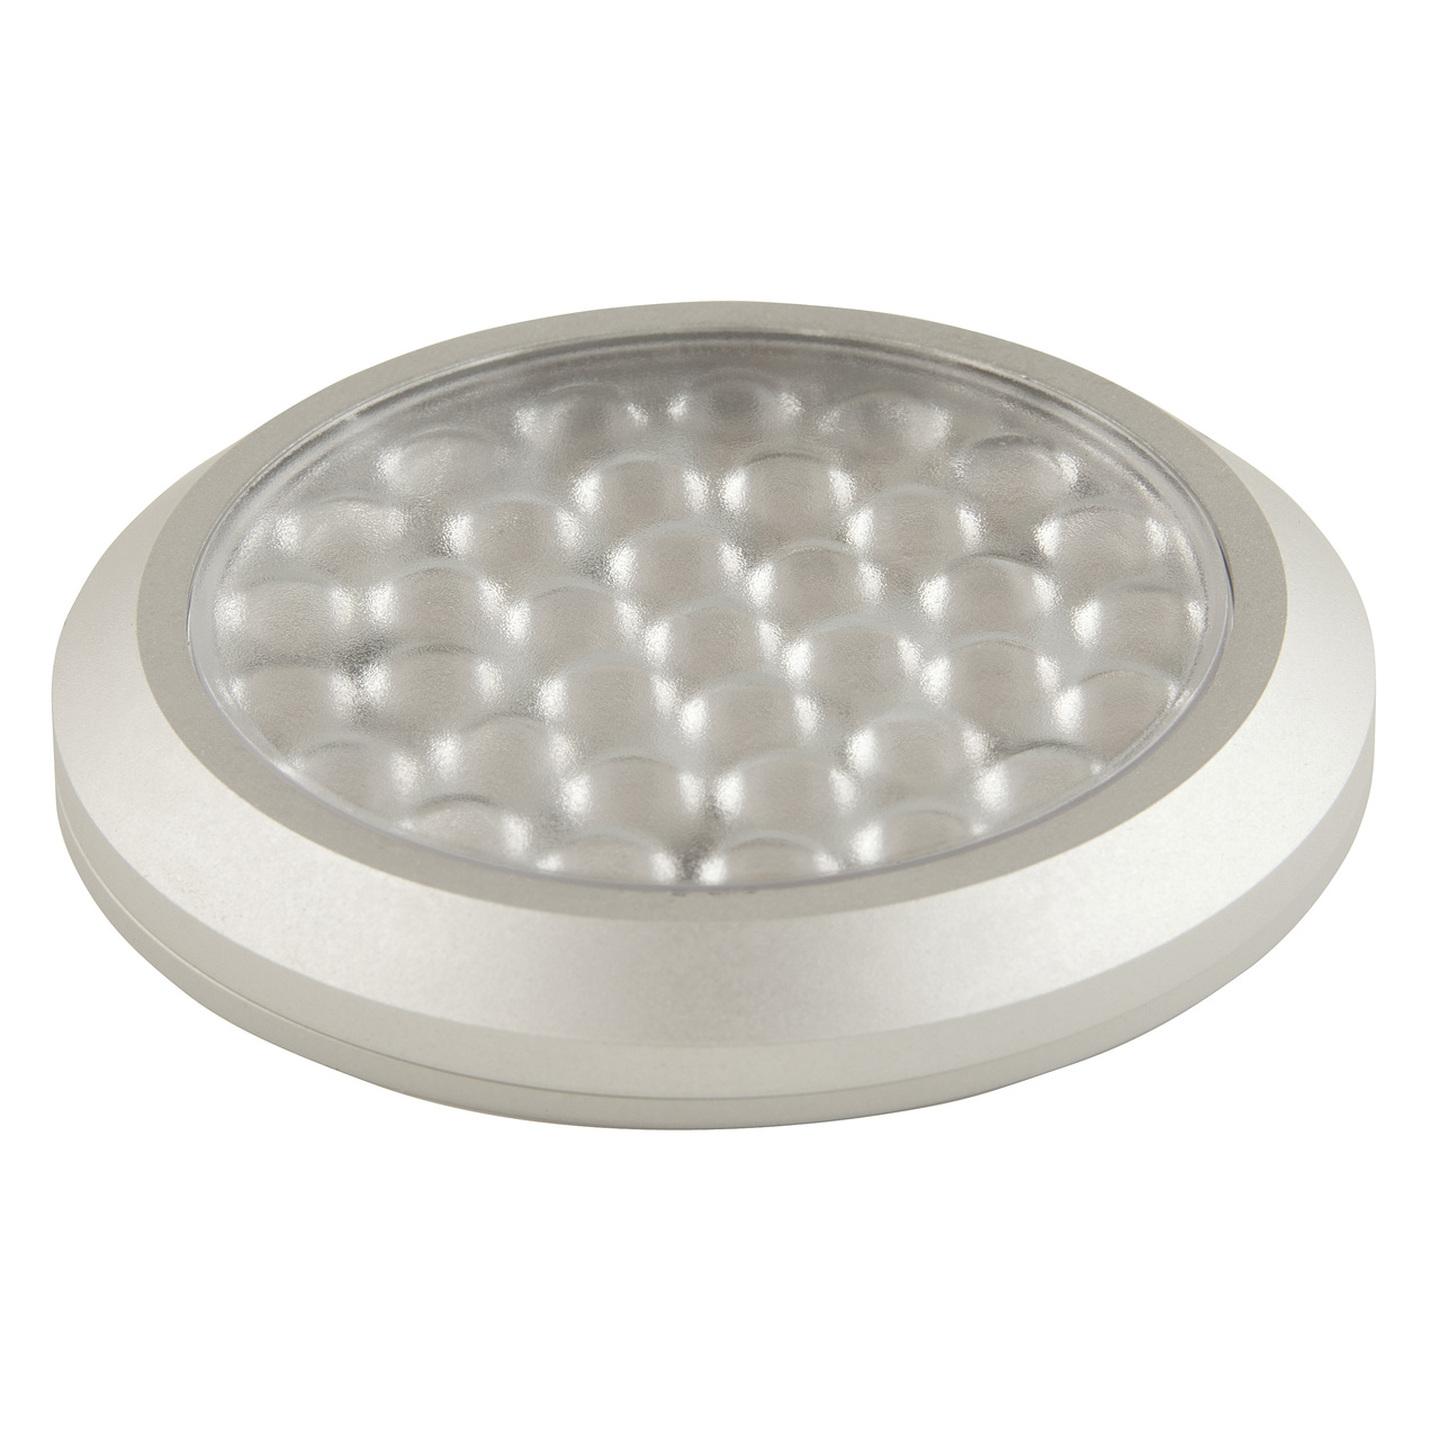 Circular 36 x LED 260 Lumen Cabinet Light with Touch Switch